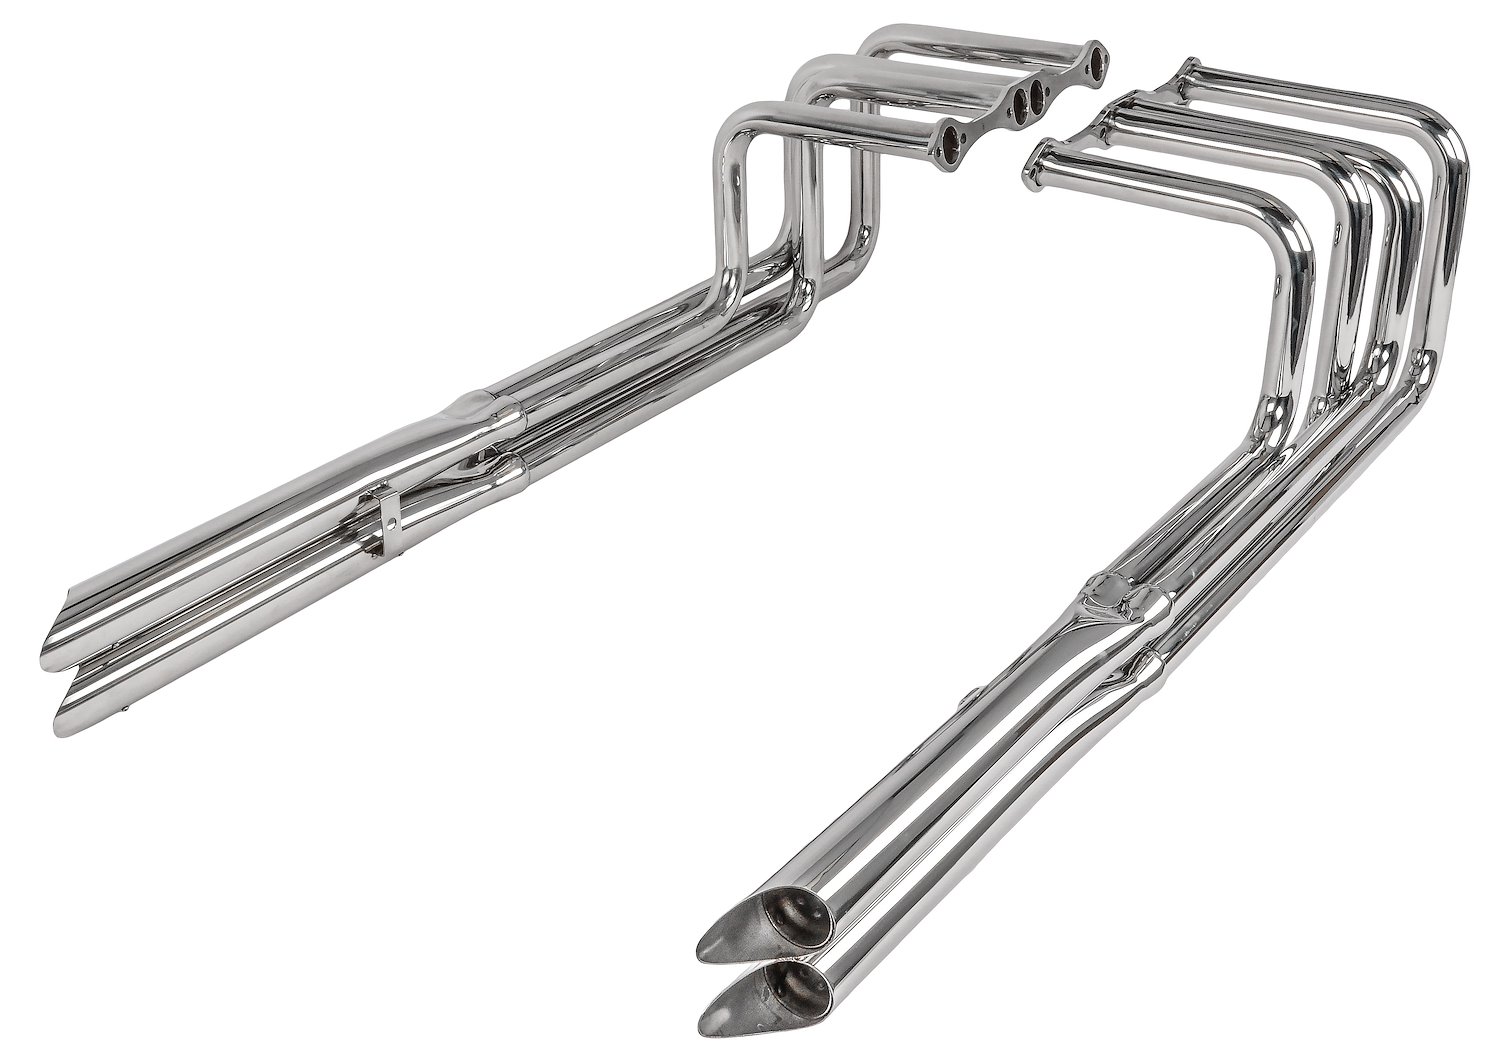 Shotgun Headers for Small Block Chevy Stainless Steel